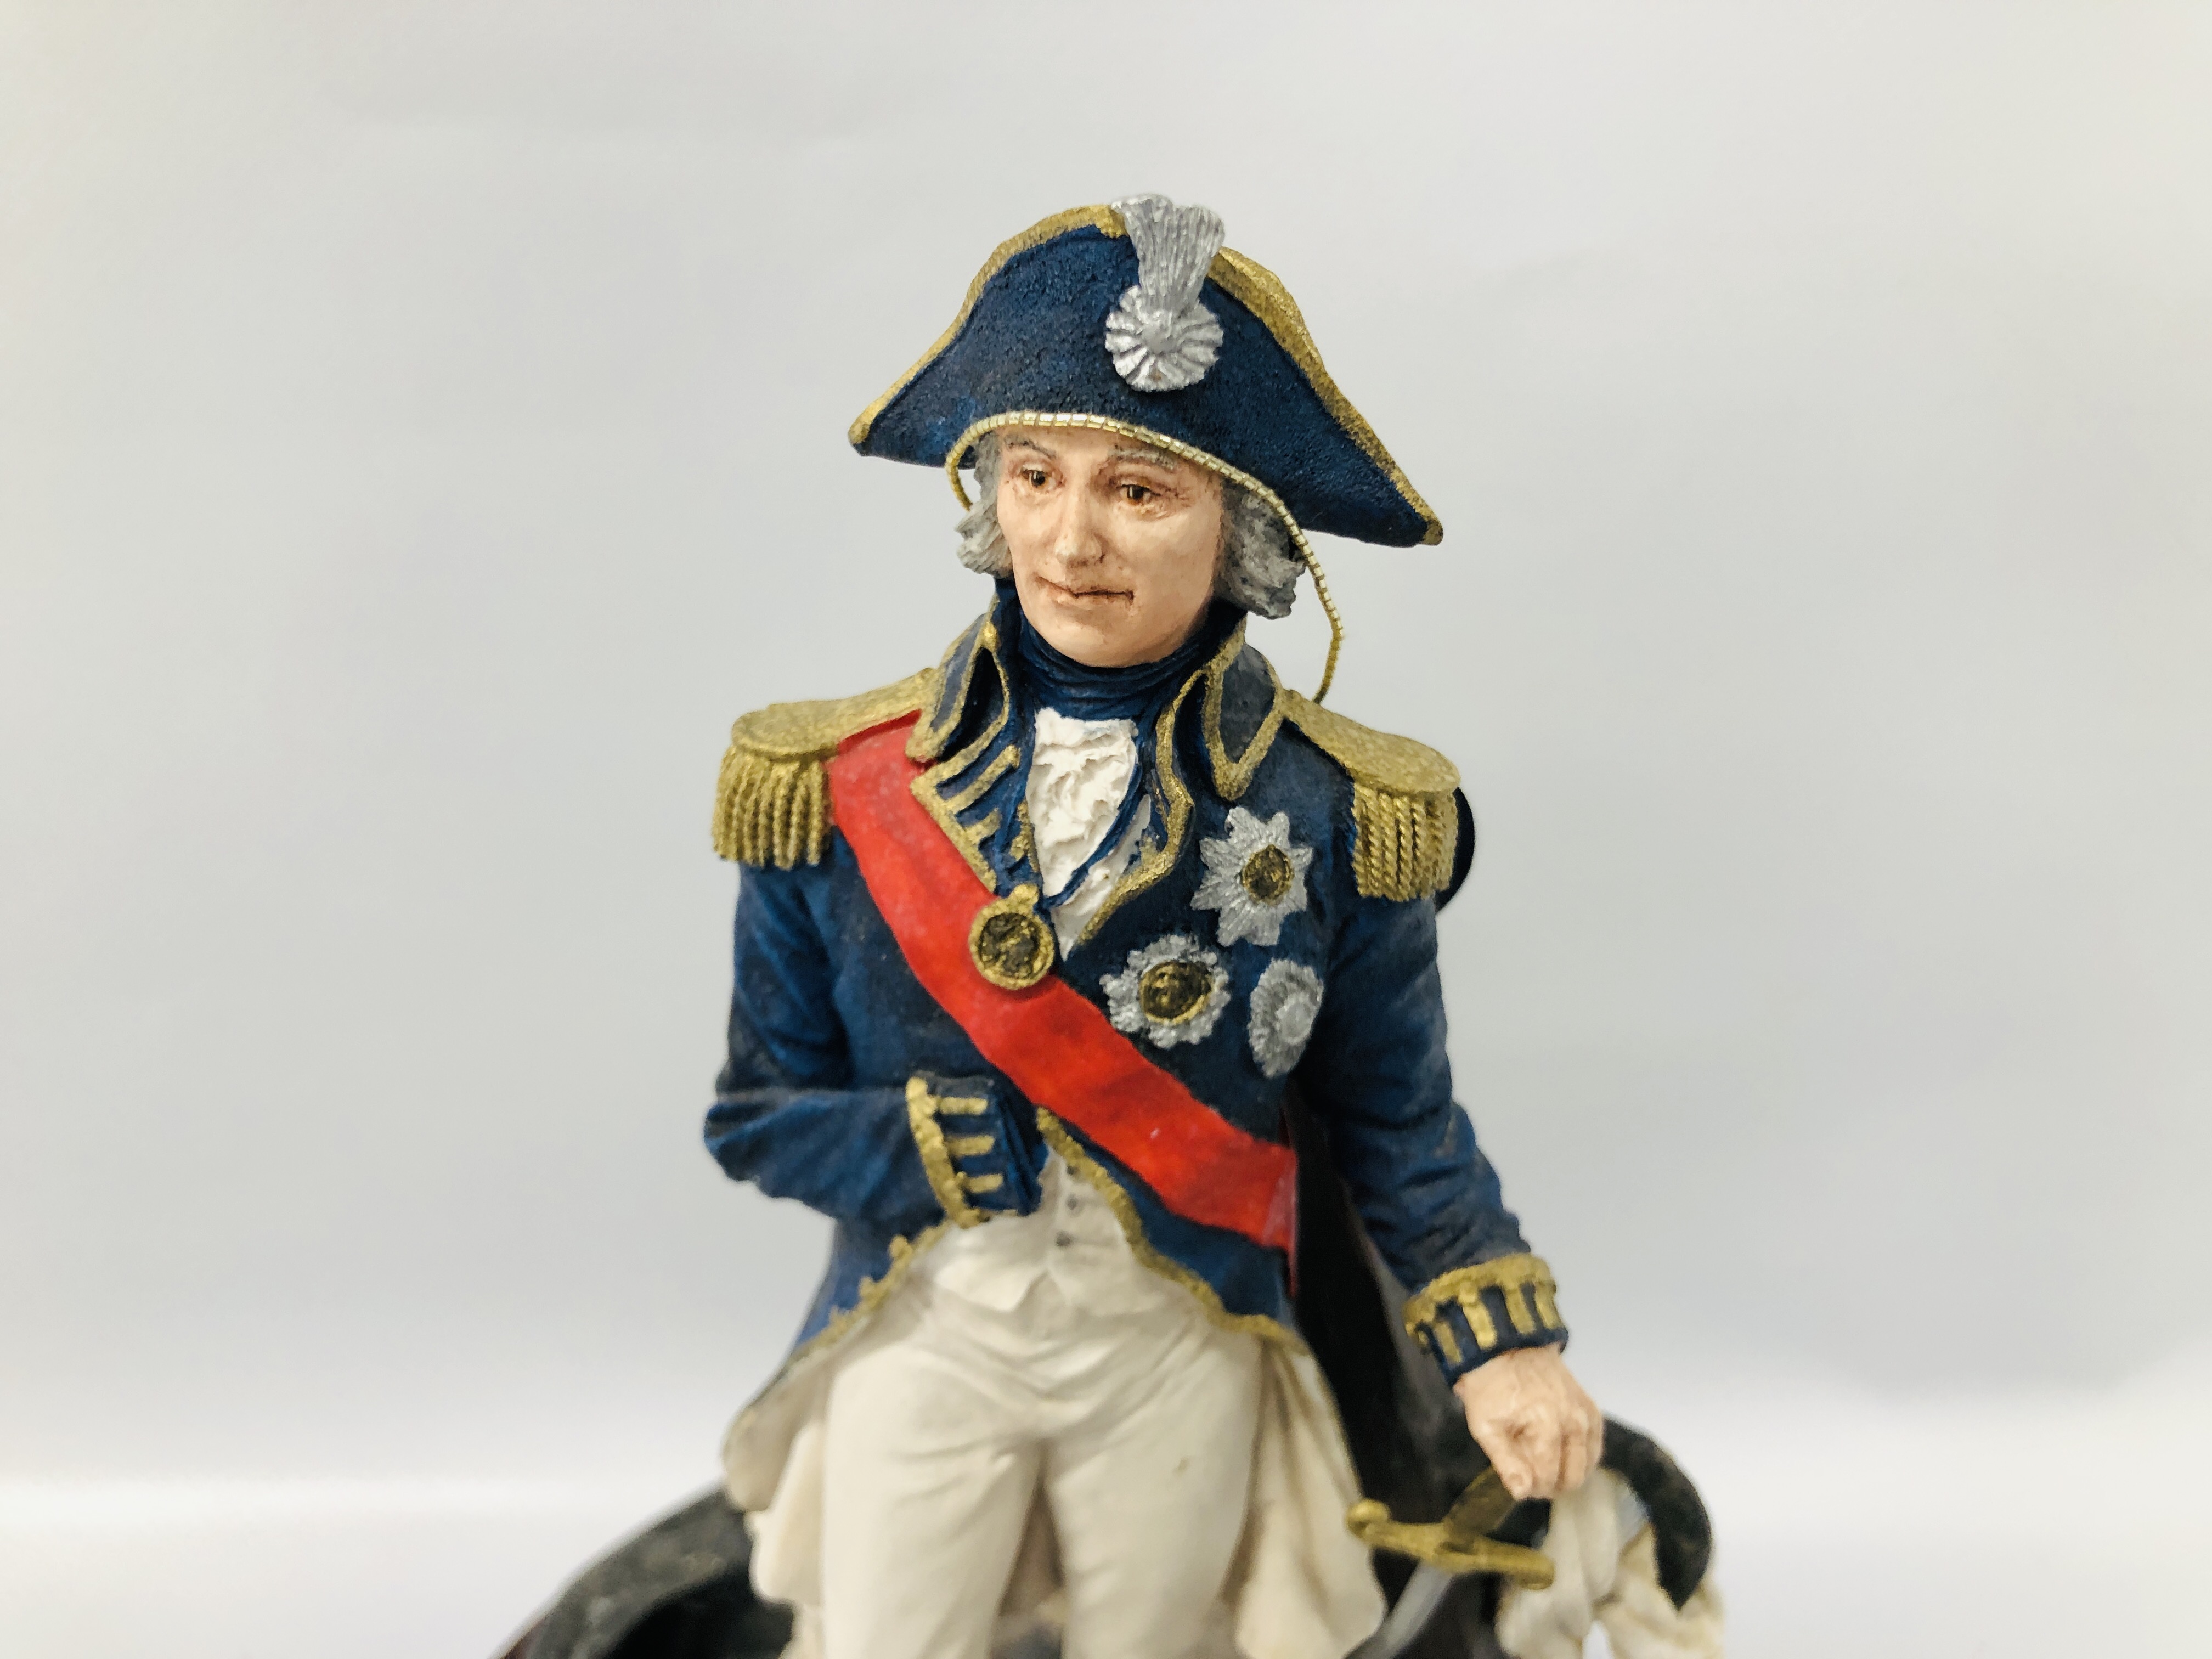 BORDER FINE ARTS LIMITED EDITION SCULPTURE 118 / 500 "ADMIRAL LORD NELSON" ALONG WITH ORIGINAL BOX - Image 2 of 12